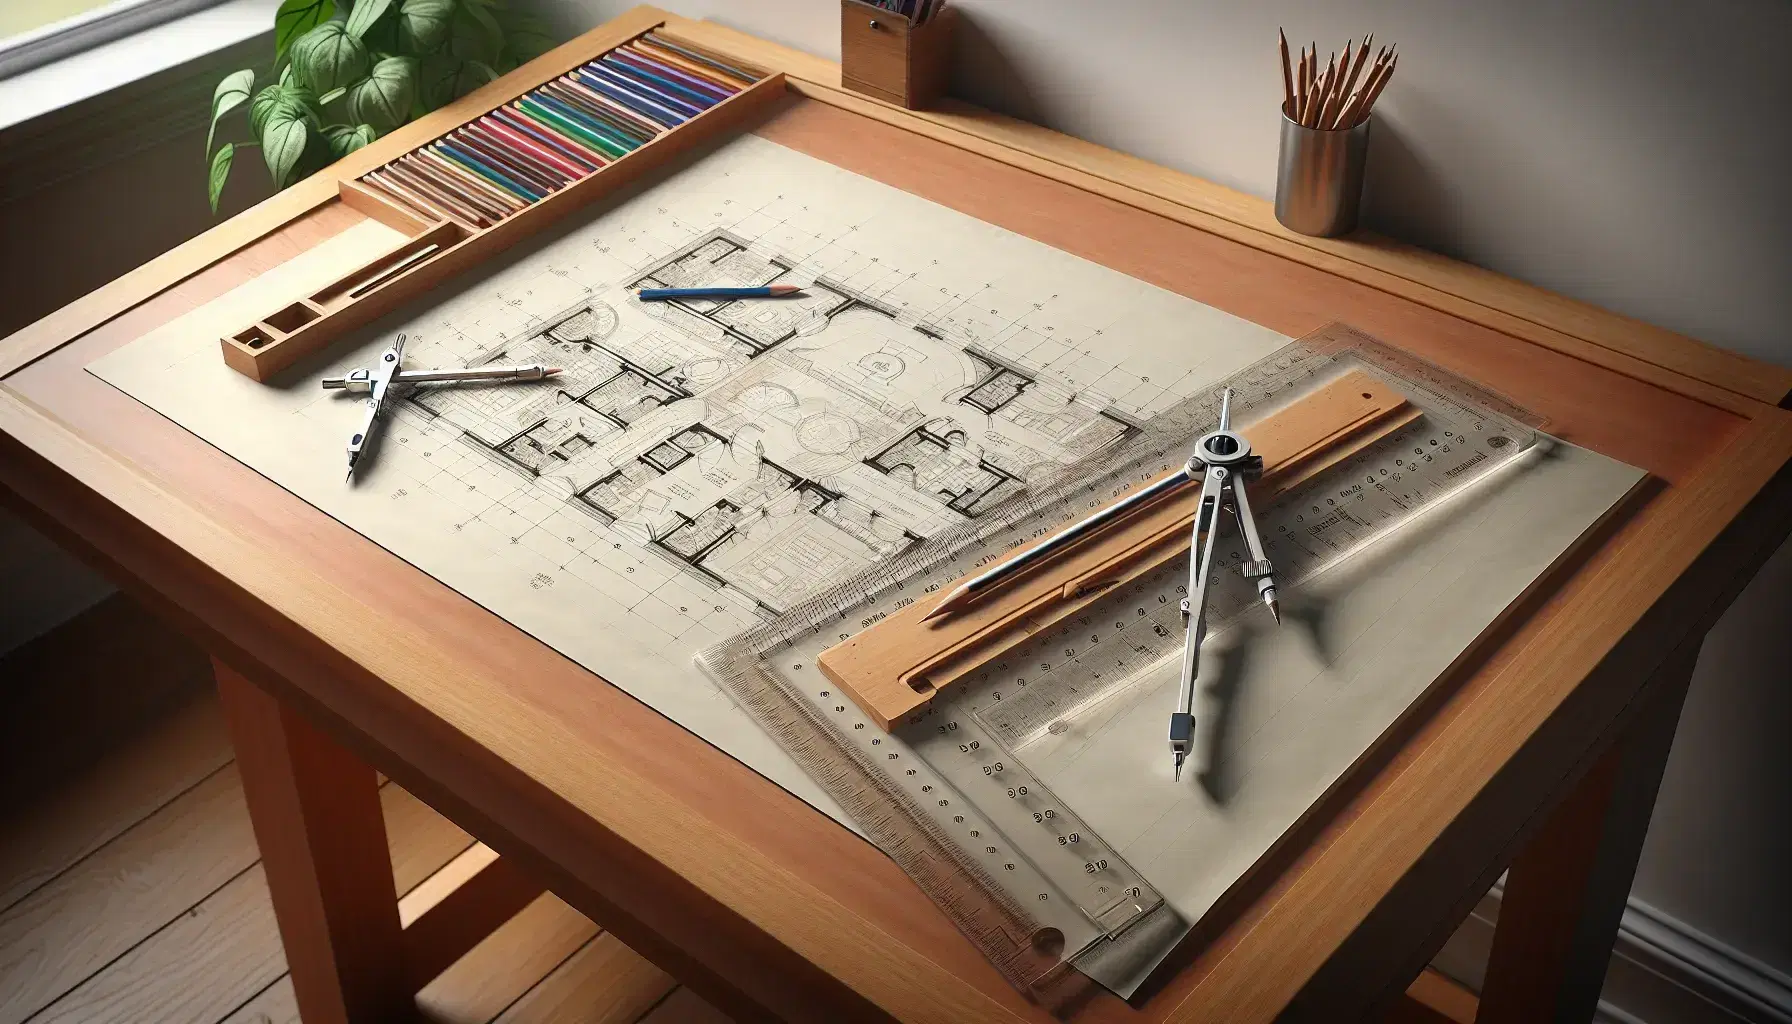 Drafting table with angled surface, white paper, transparent ruler, metal compasses, and a pencil-drawn architectural floor plan, alongside colored pencils and a potted plant.